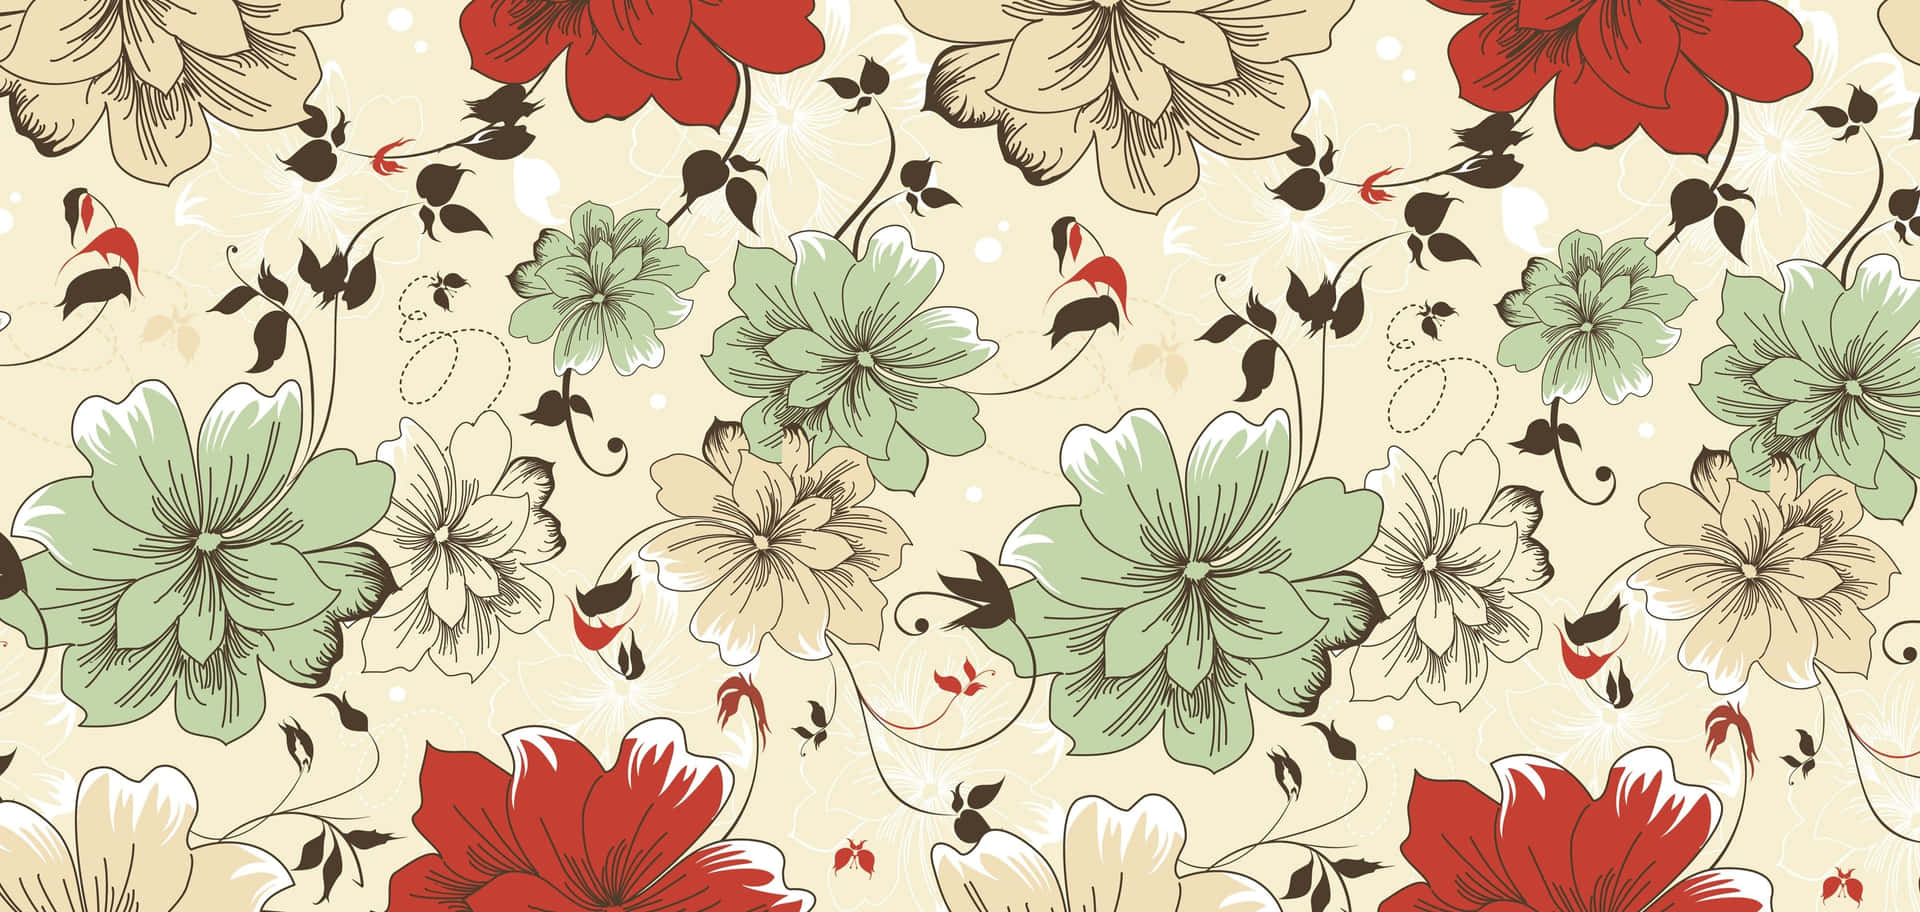 Bright floral pattern in beautiful red and blue colors